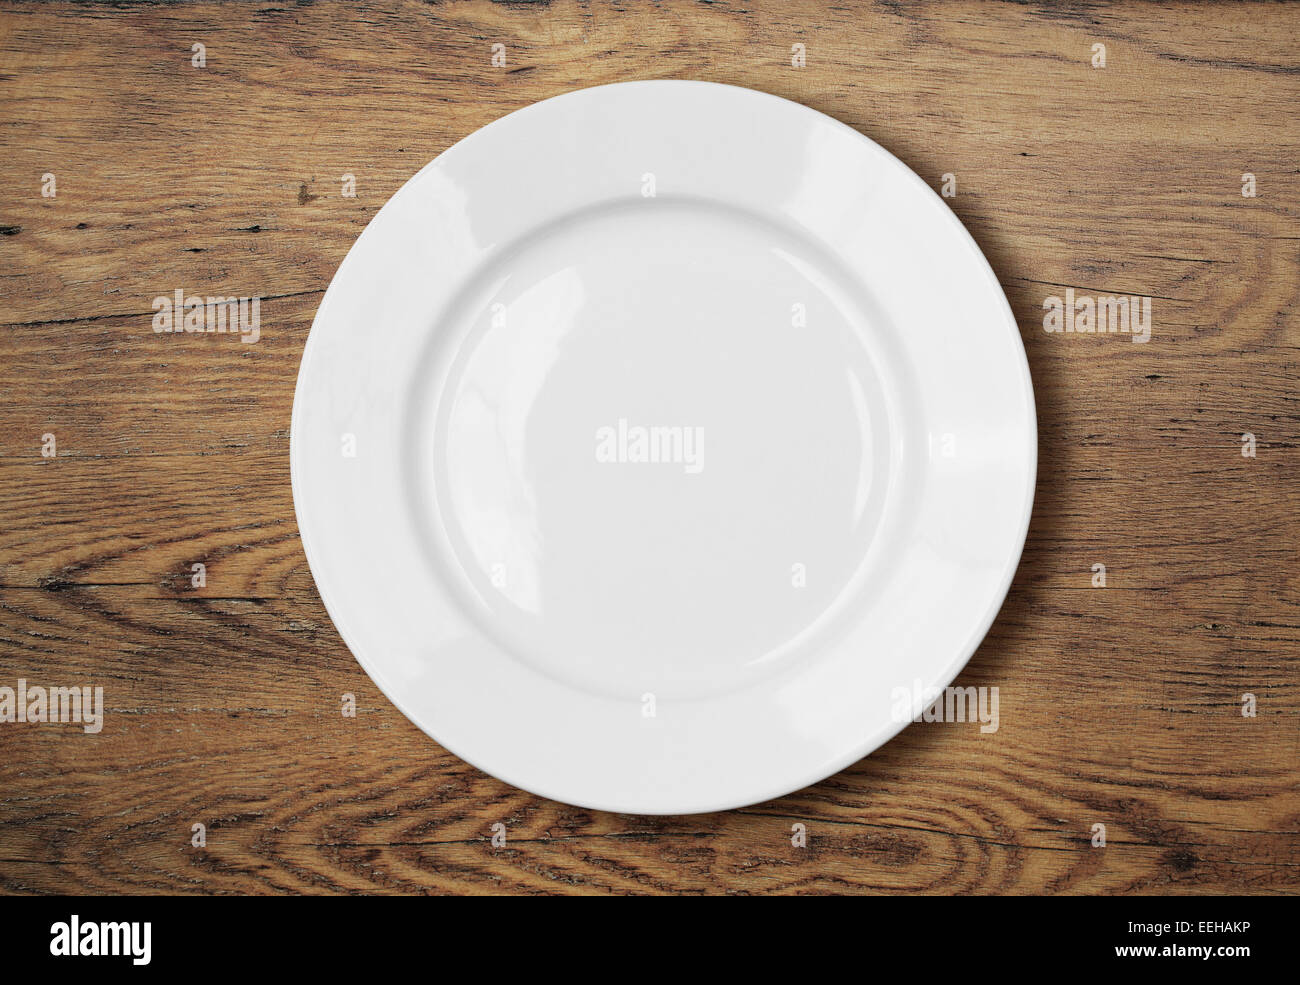 white empty dinner plate on wooden table surface Stock Photo